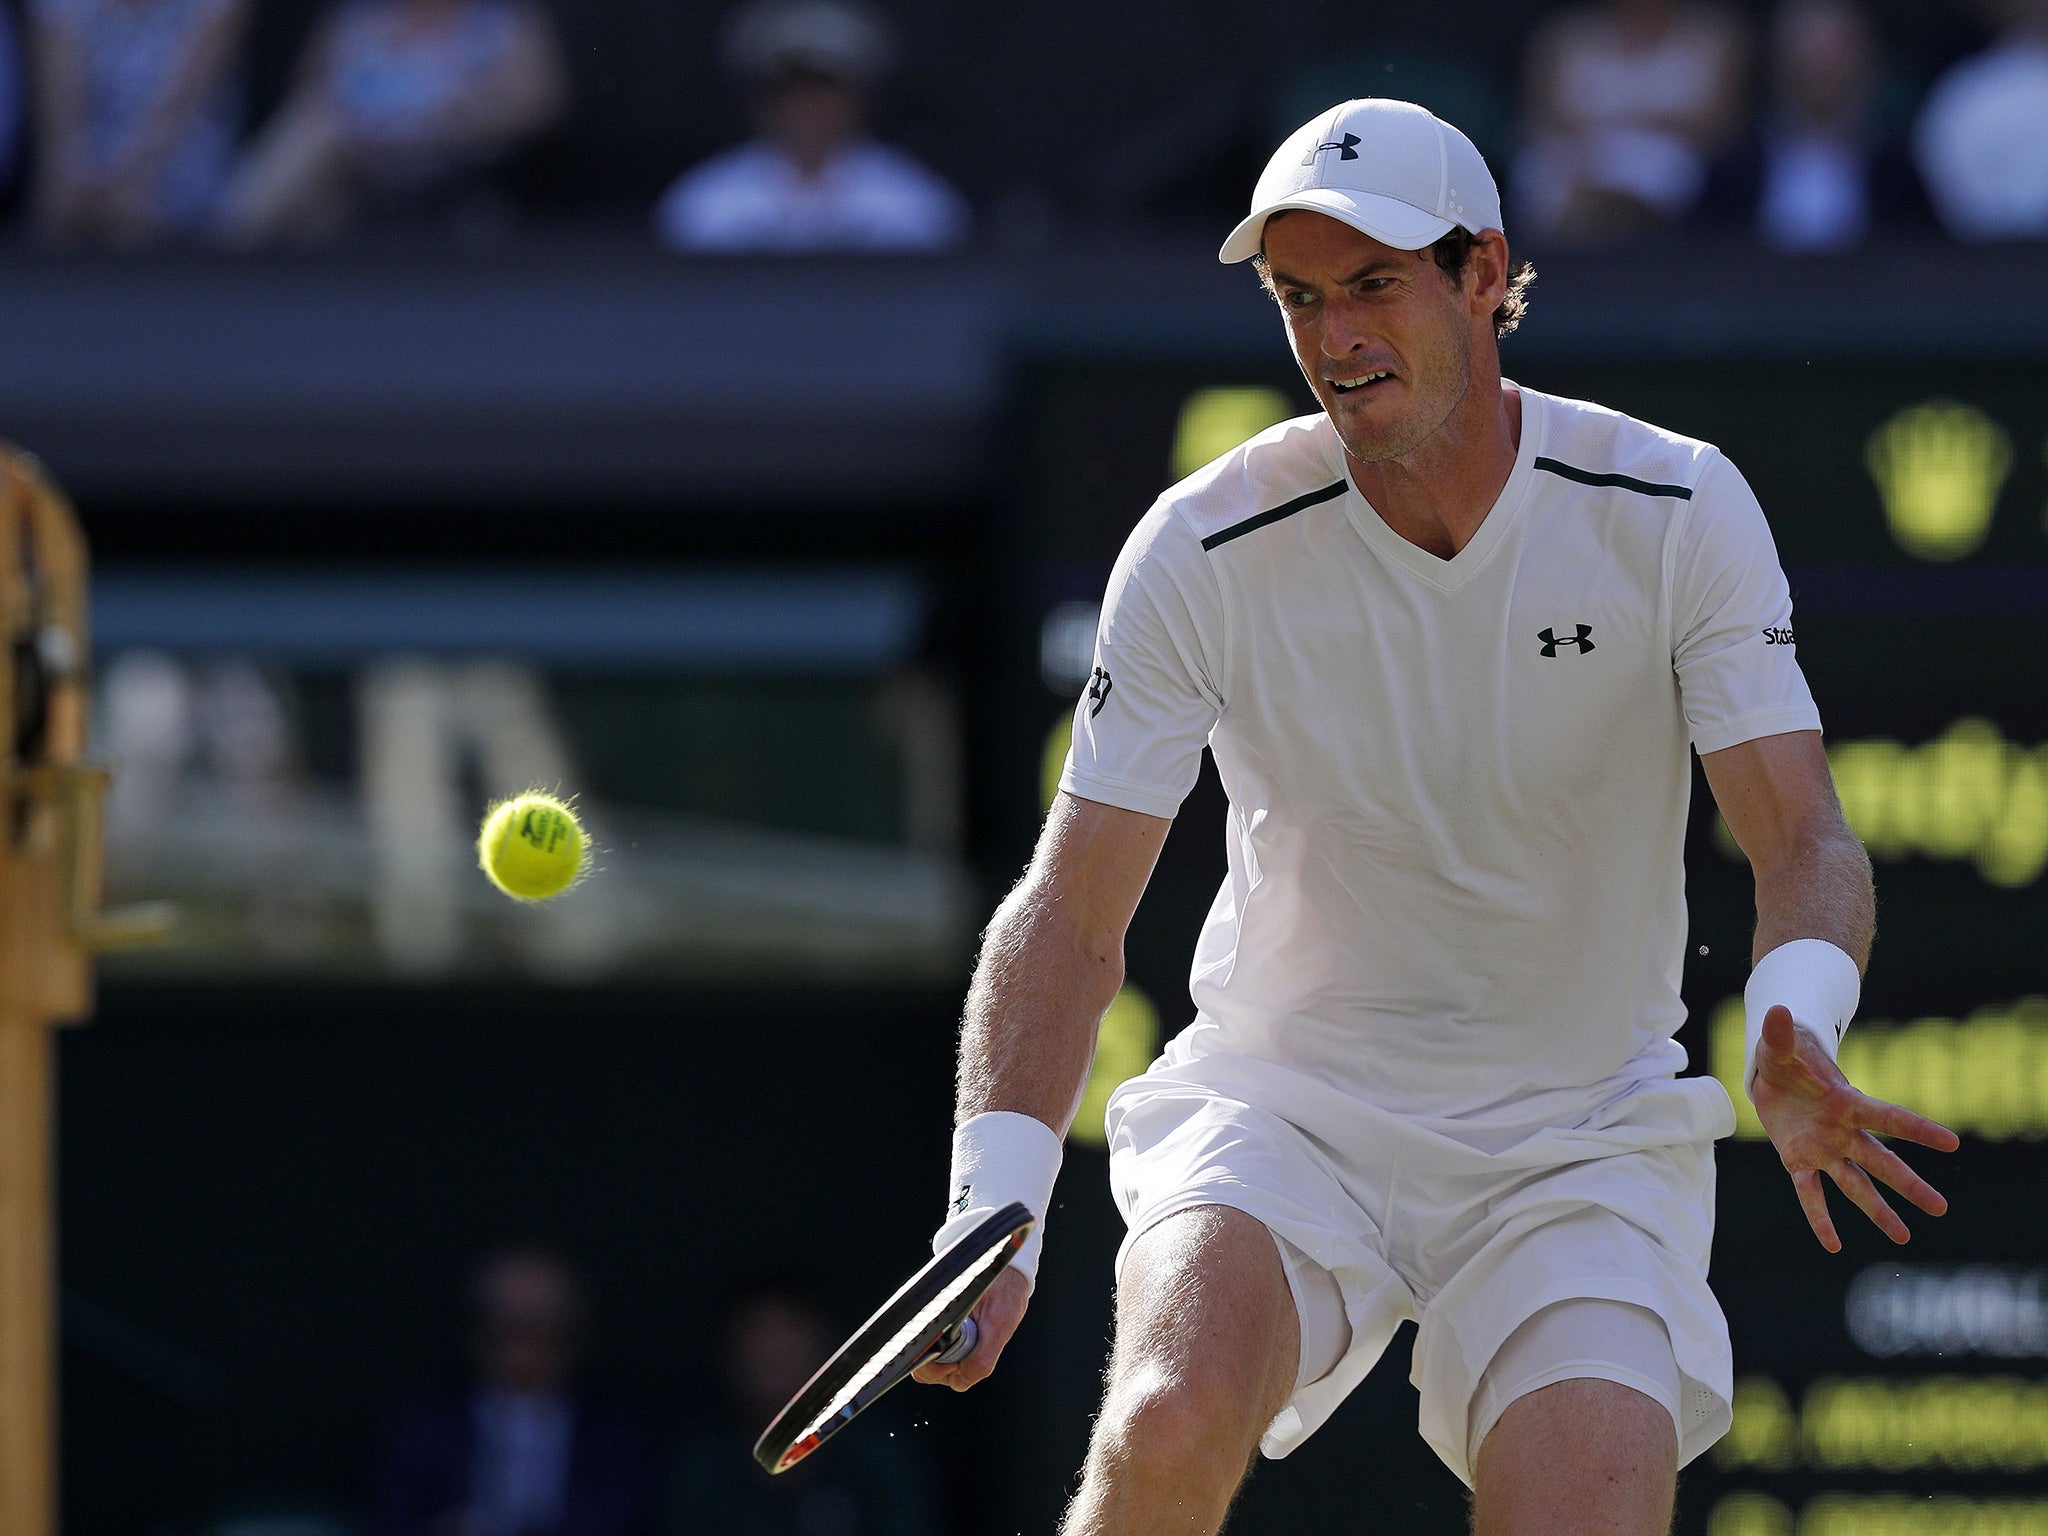 Andy Murray beat Dustin Brown in the second round on Wednesday